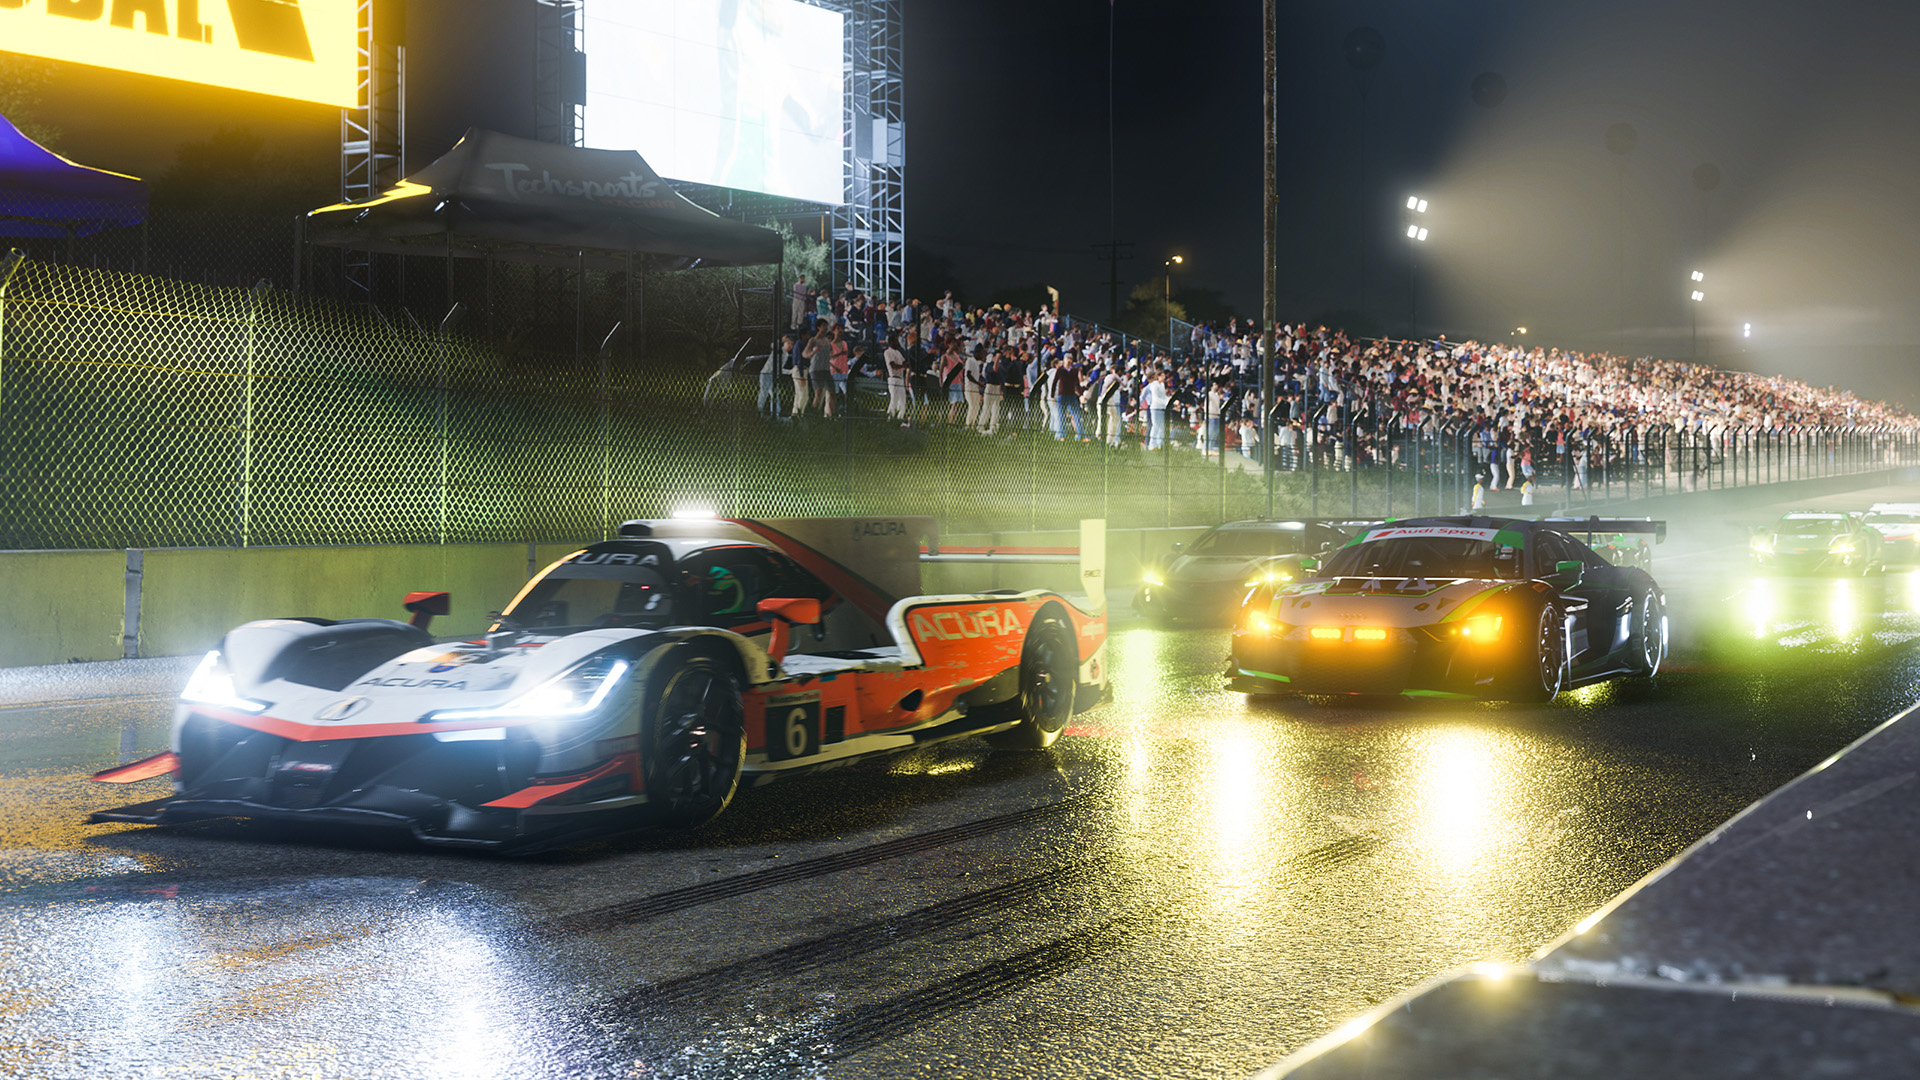 Why Forza Motorsport 5 has fewer cars and tracks than Forza 4